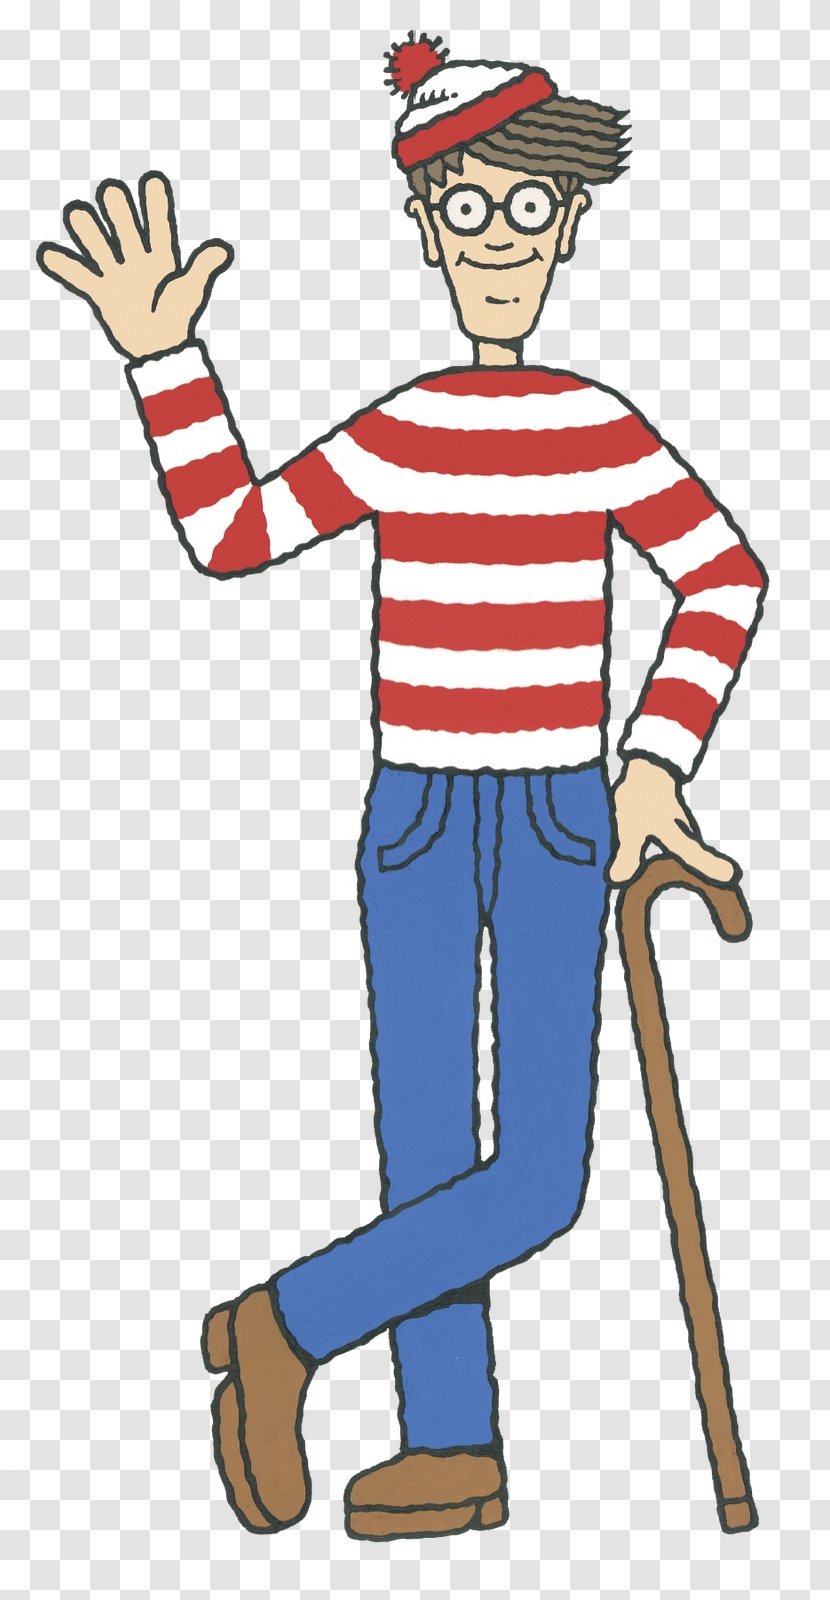 Where's Wally? Book Series Odlaw Children's Literature - Joint Transparent PNG